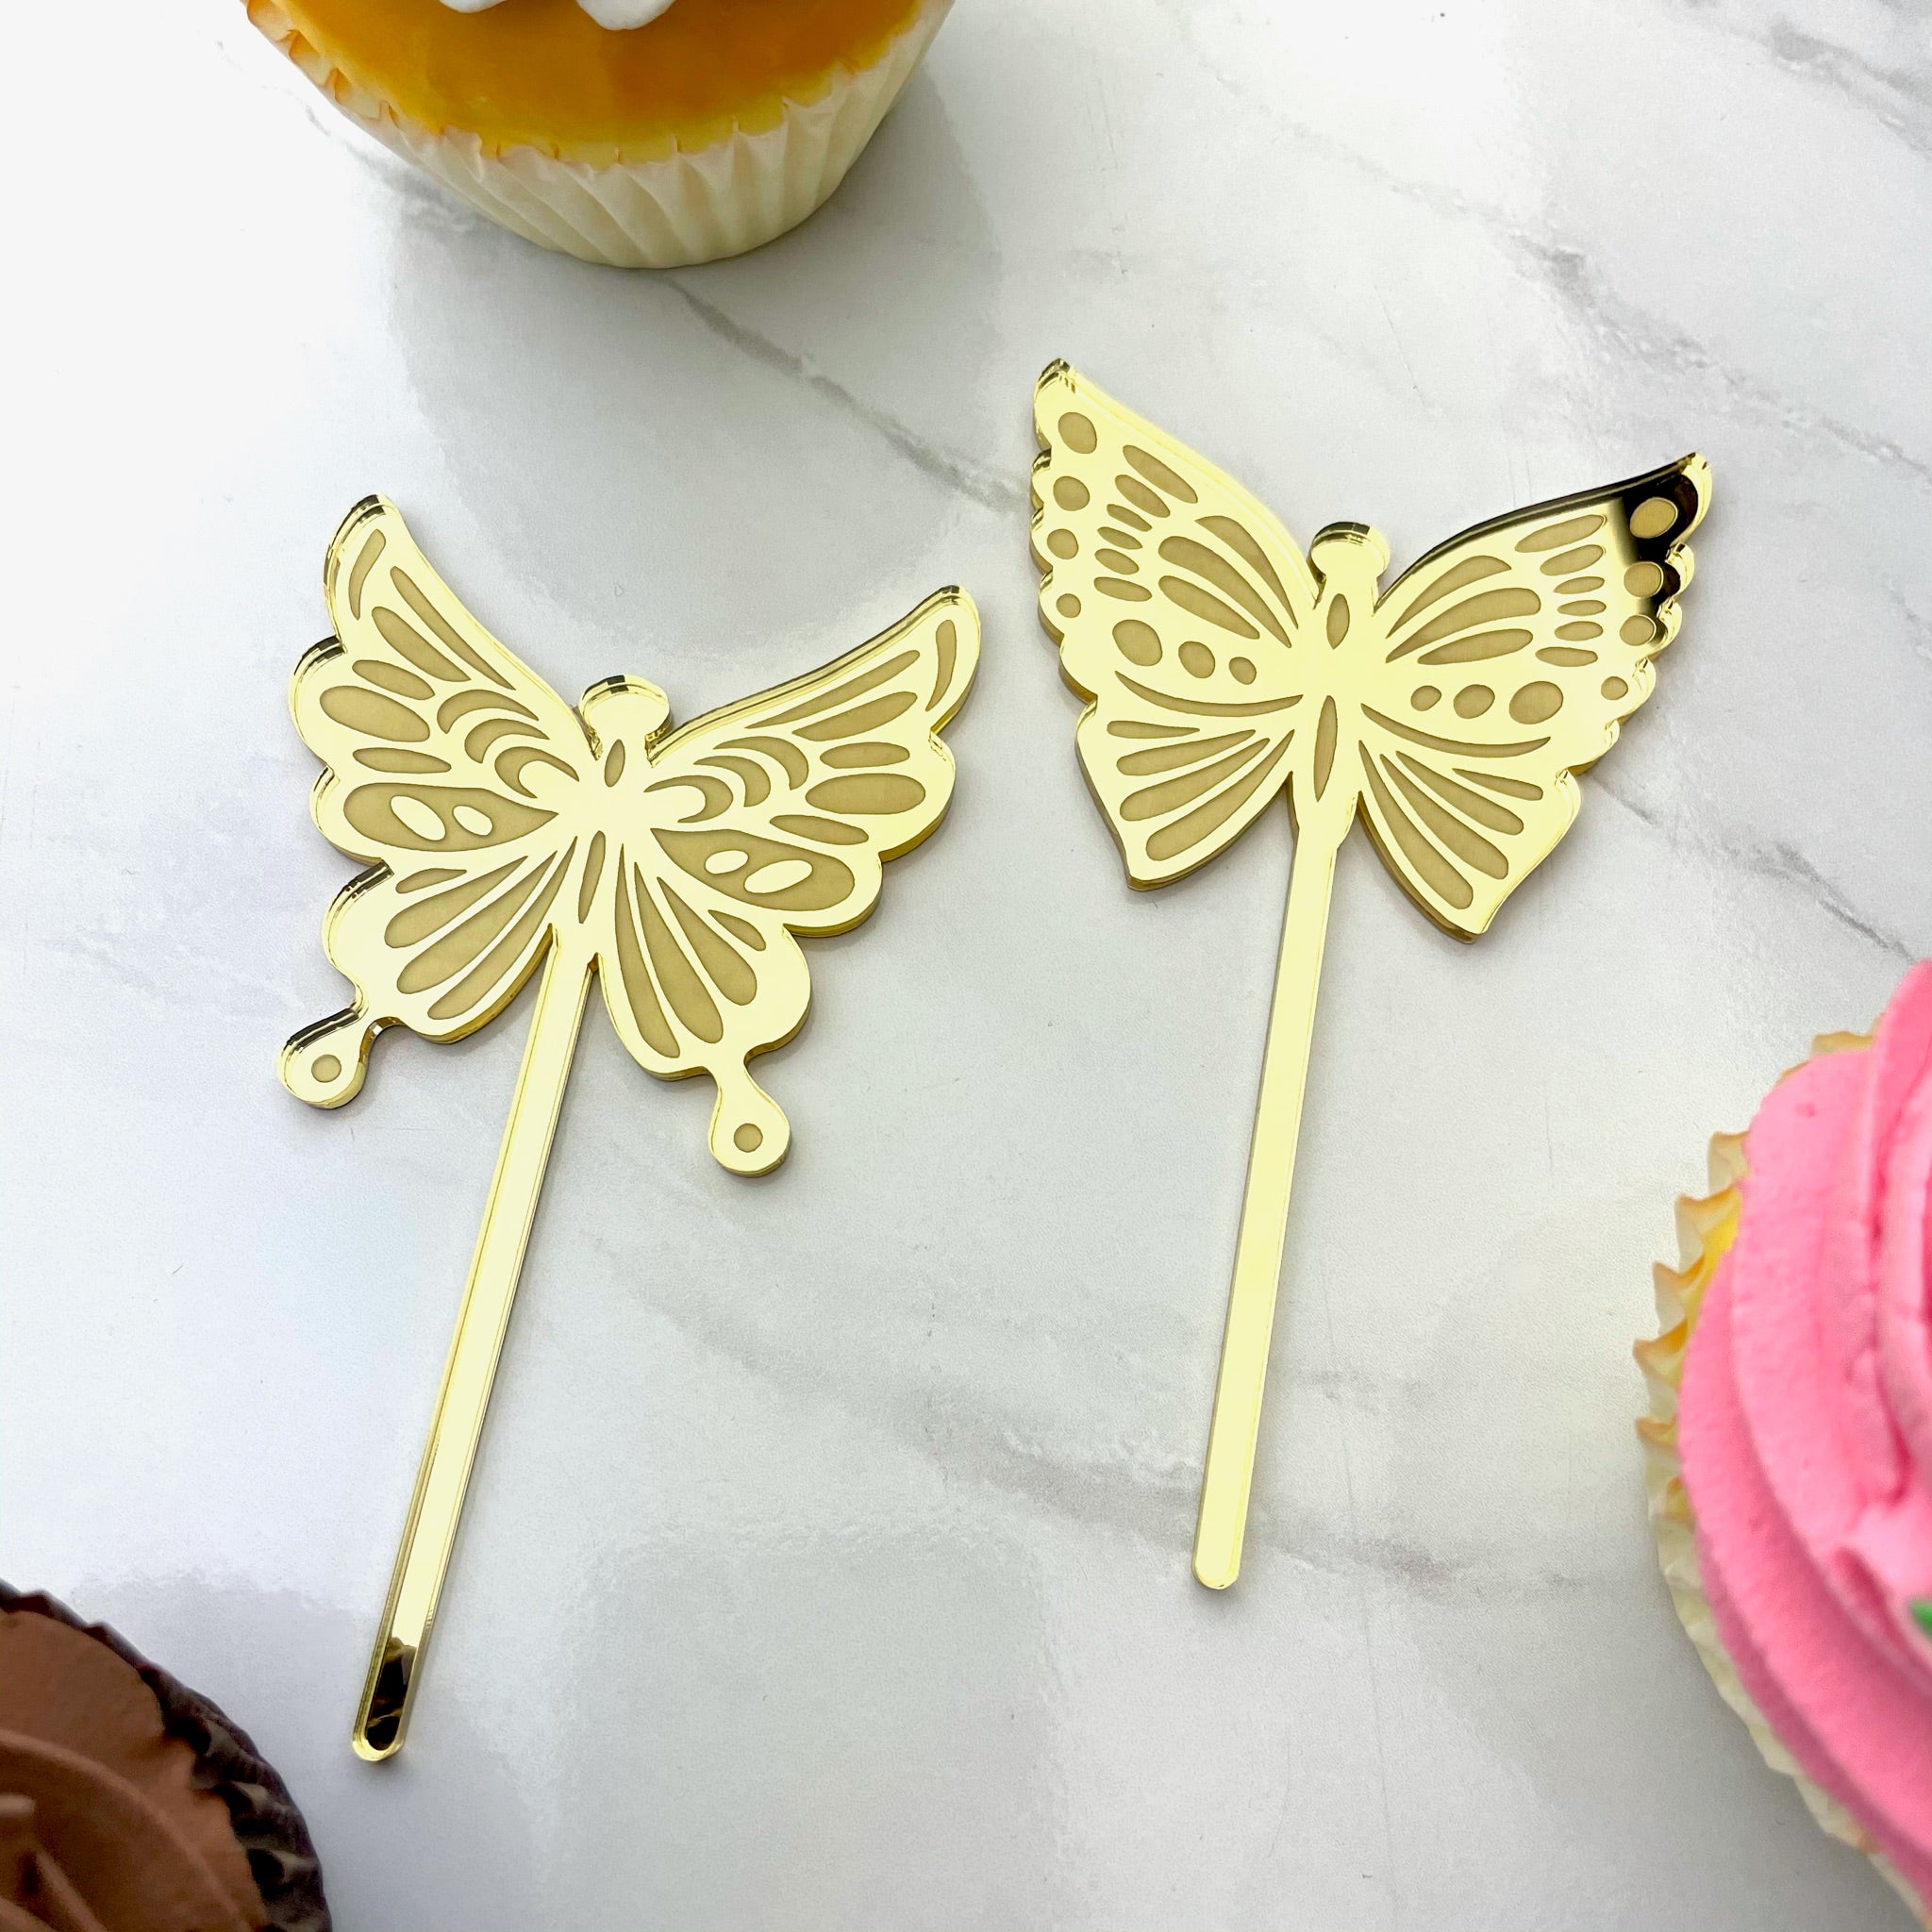 Butterfly Cake Toppers: Acrylic, Rose Gold, Customizable